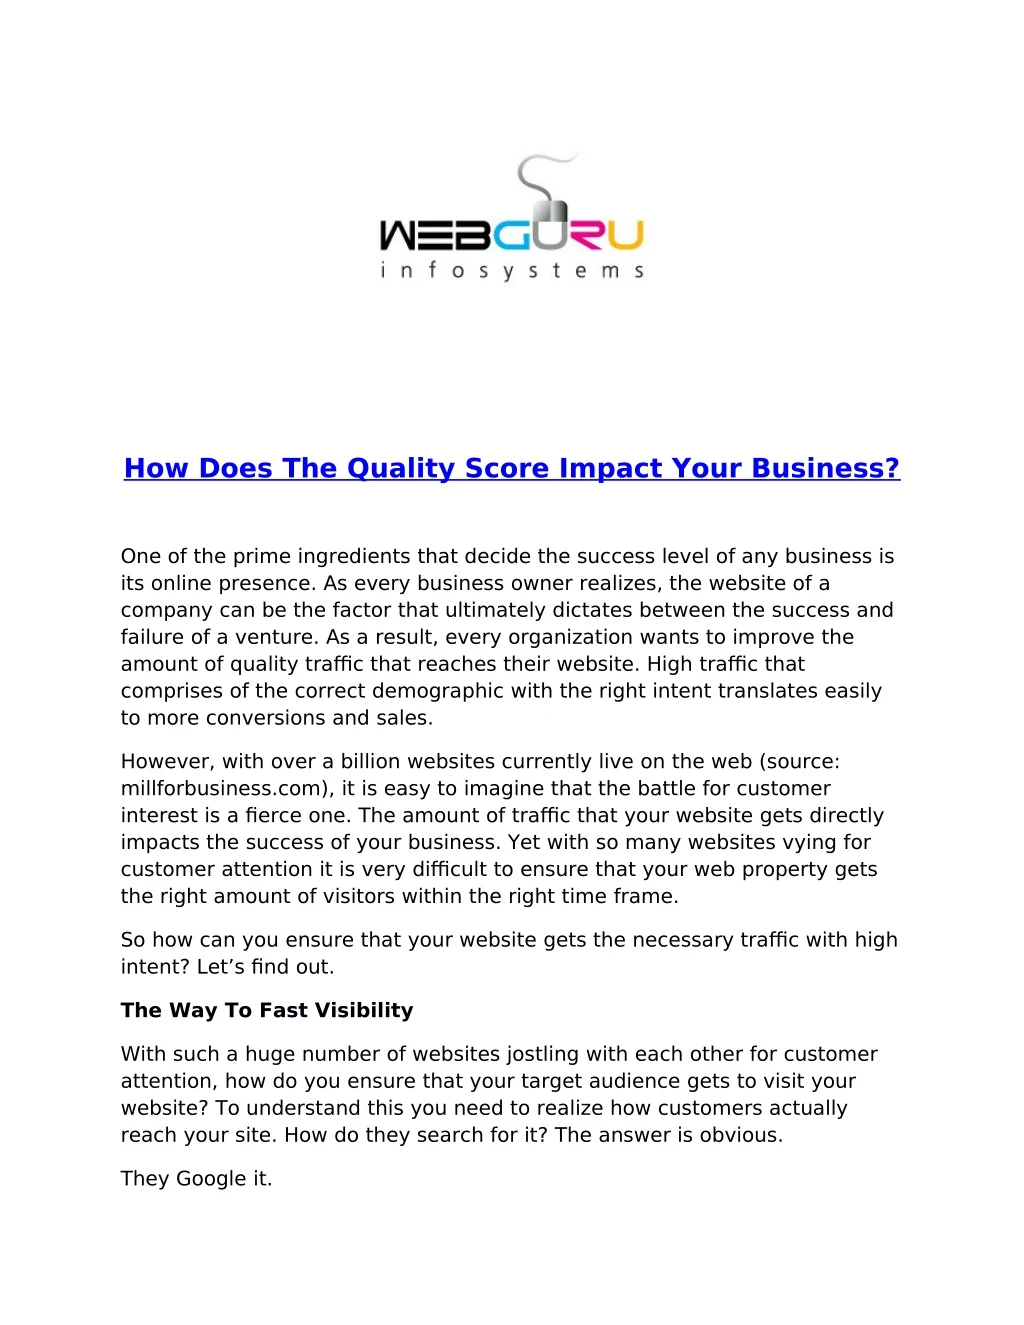 how does the quality score impact your business